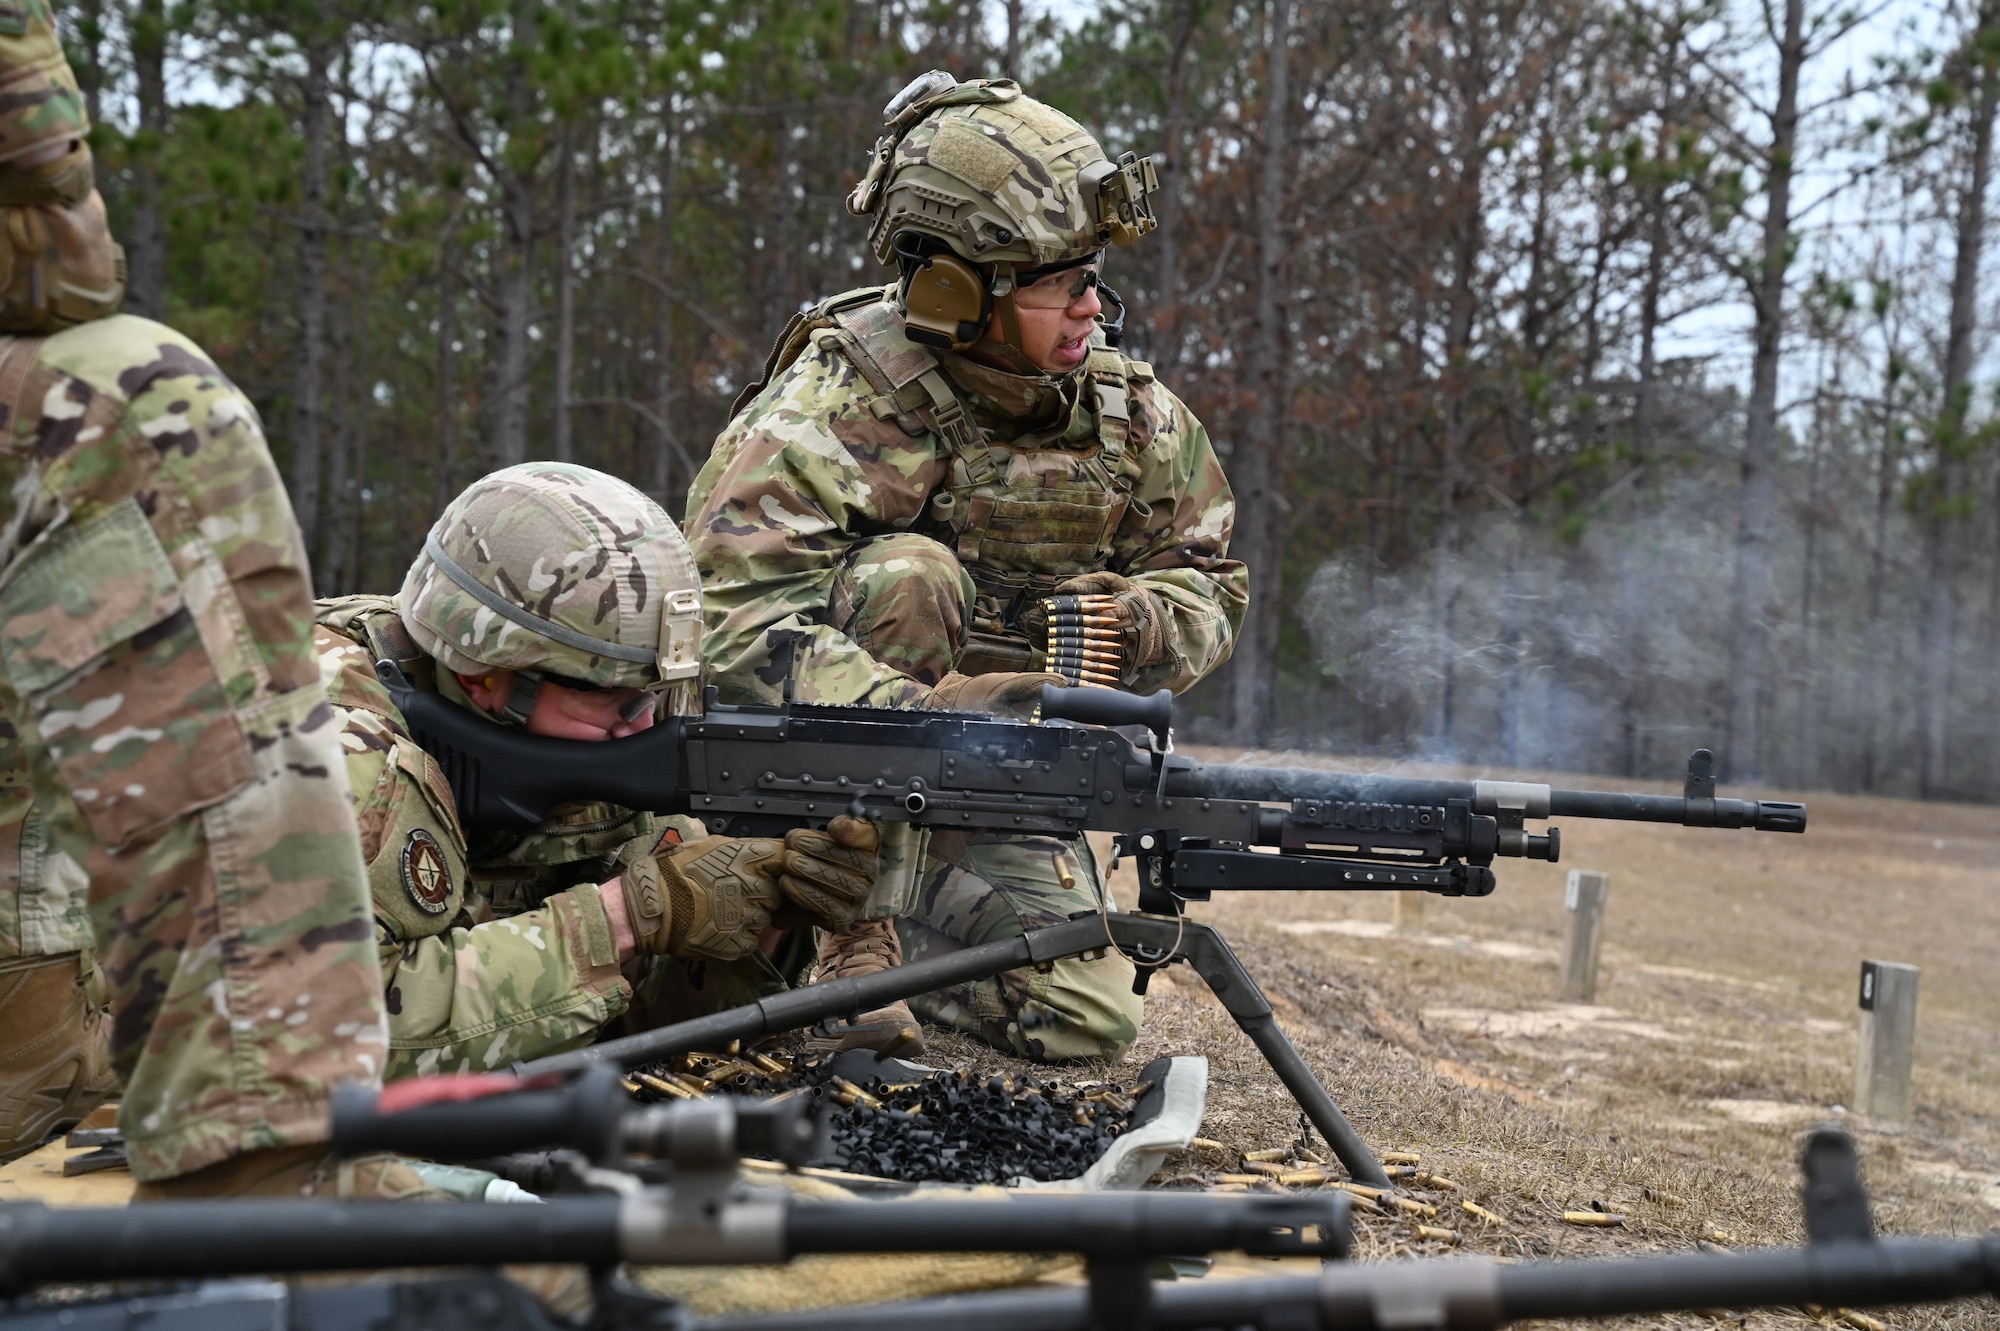 Air Force Reserve members fire heavy weapons.